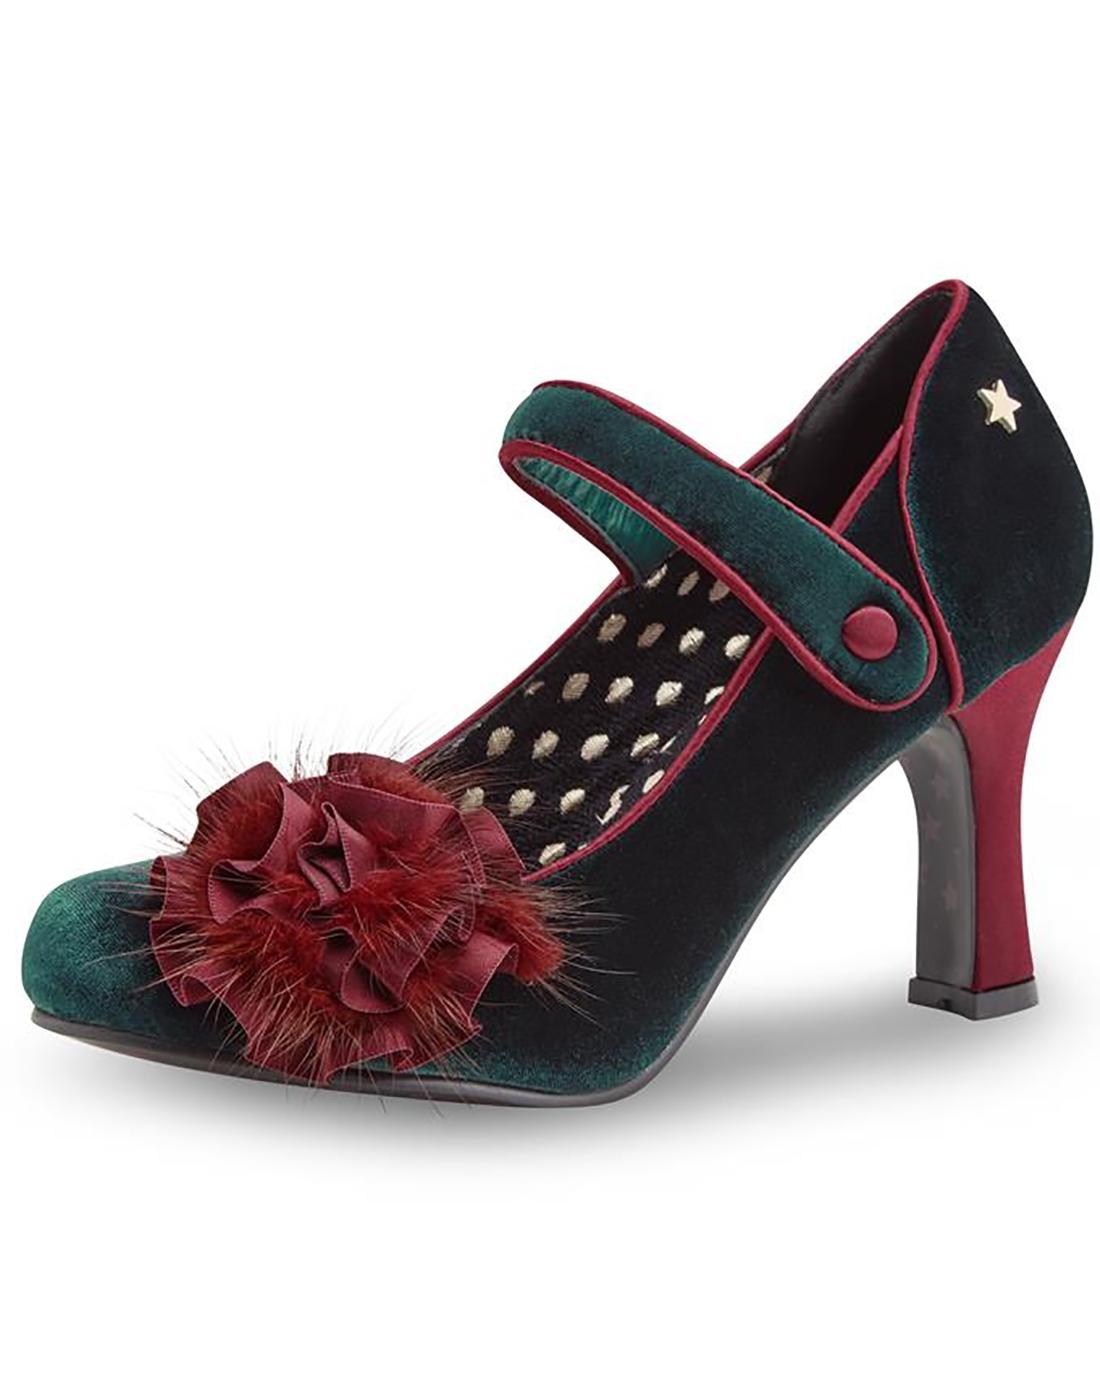 JOE BROWNS COUTURE Parade Retro Vintage Velvet Shoes in Green